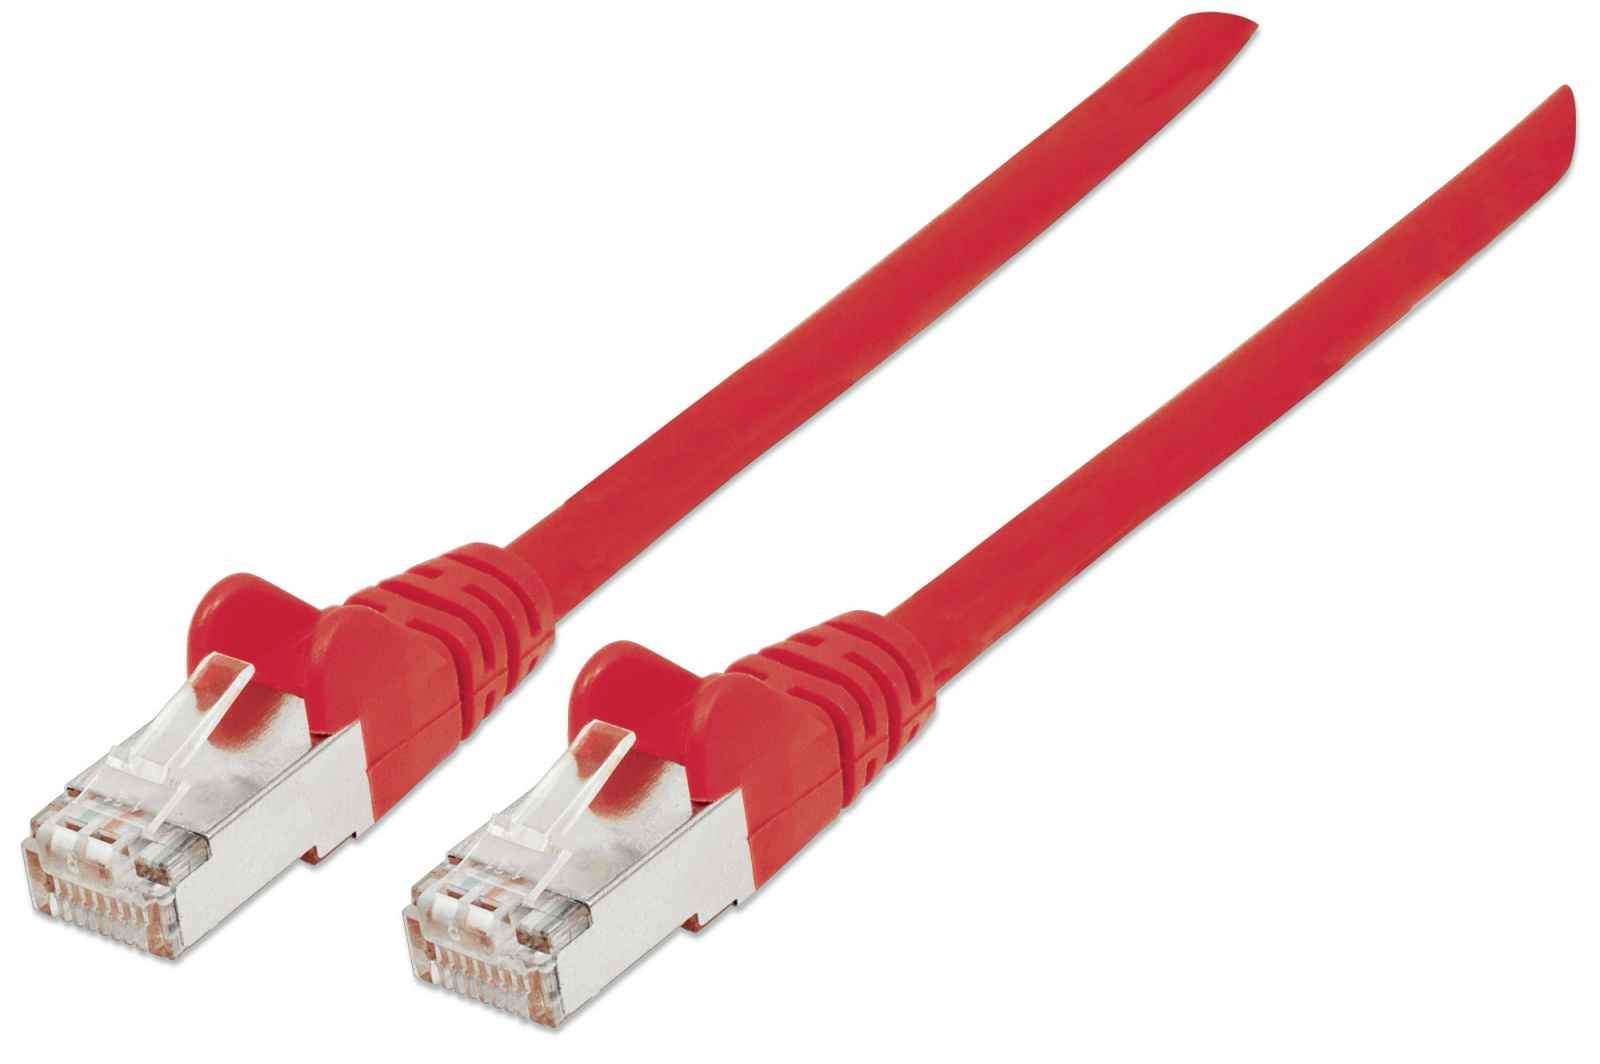 Photos - Cable (video, audio, USB) INTELLINET Network Patch Cable, Cat7 Cable/Cat6A Plugs, 0.5m, Red, Cop 740 